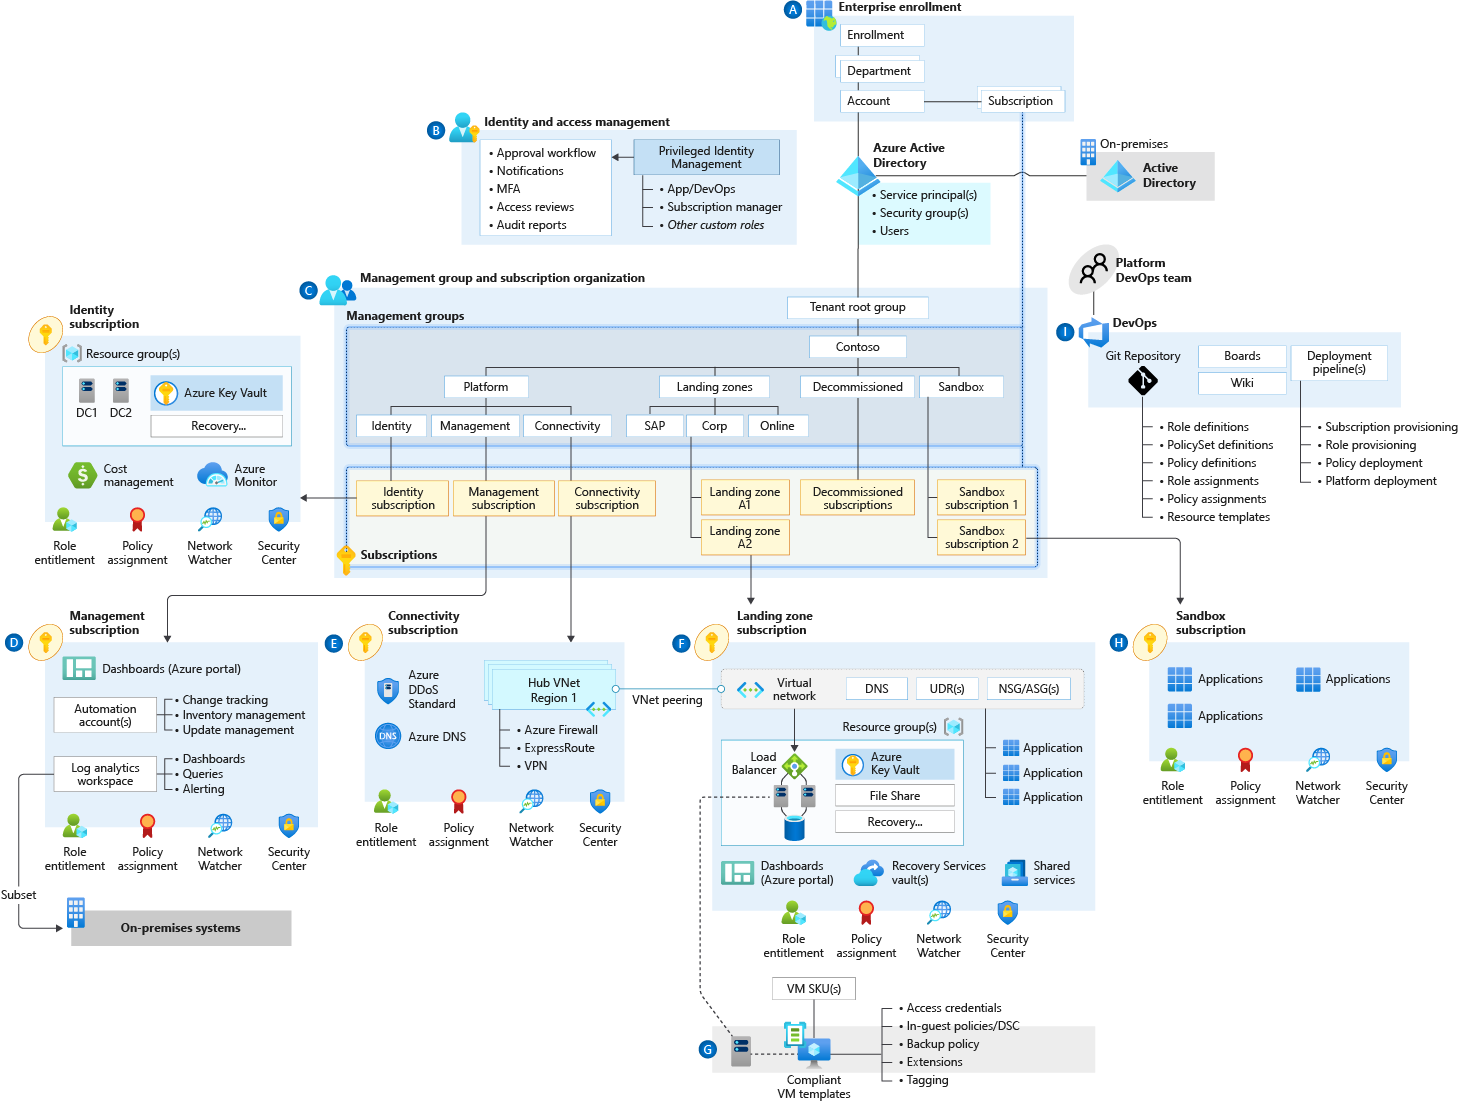 Overview of the enterprise-scale reference architecture.